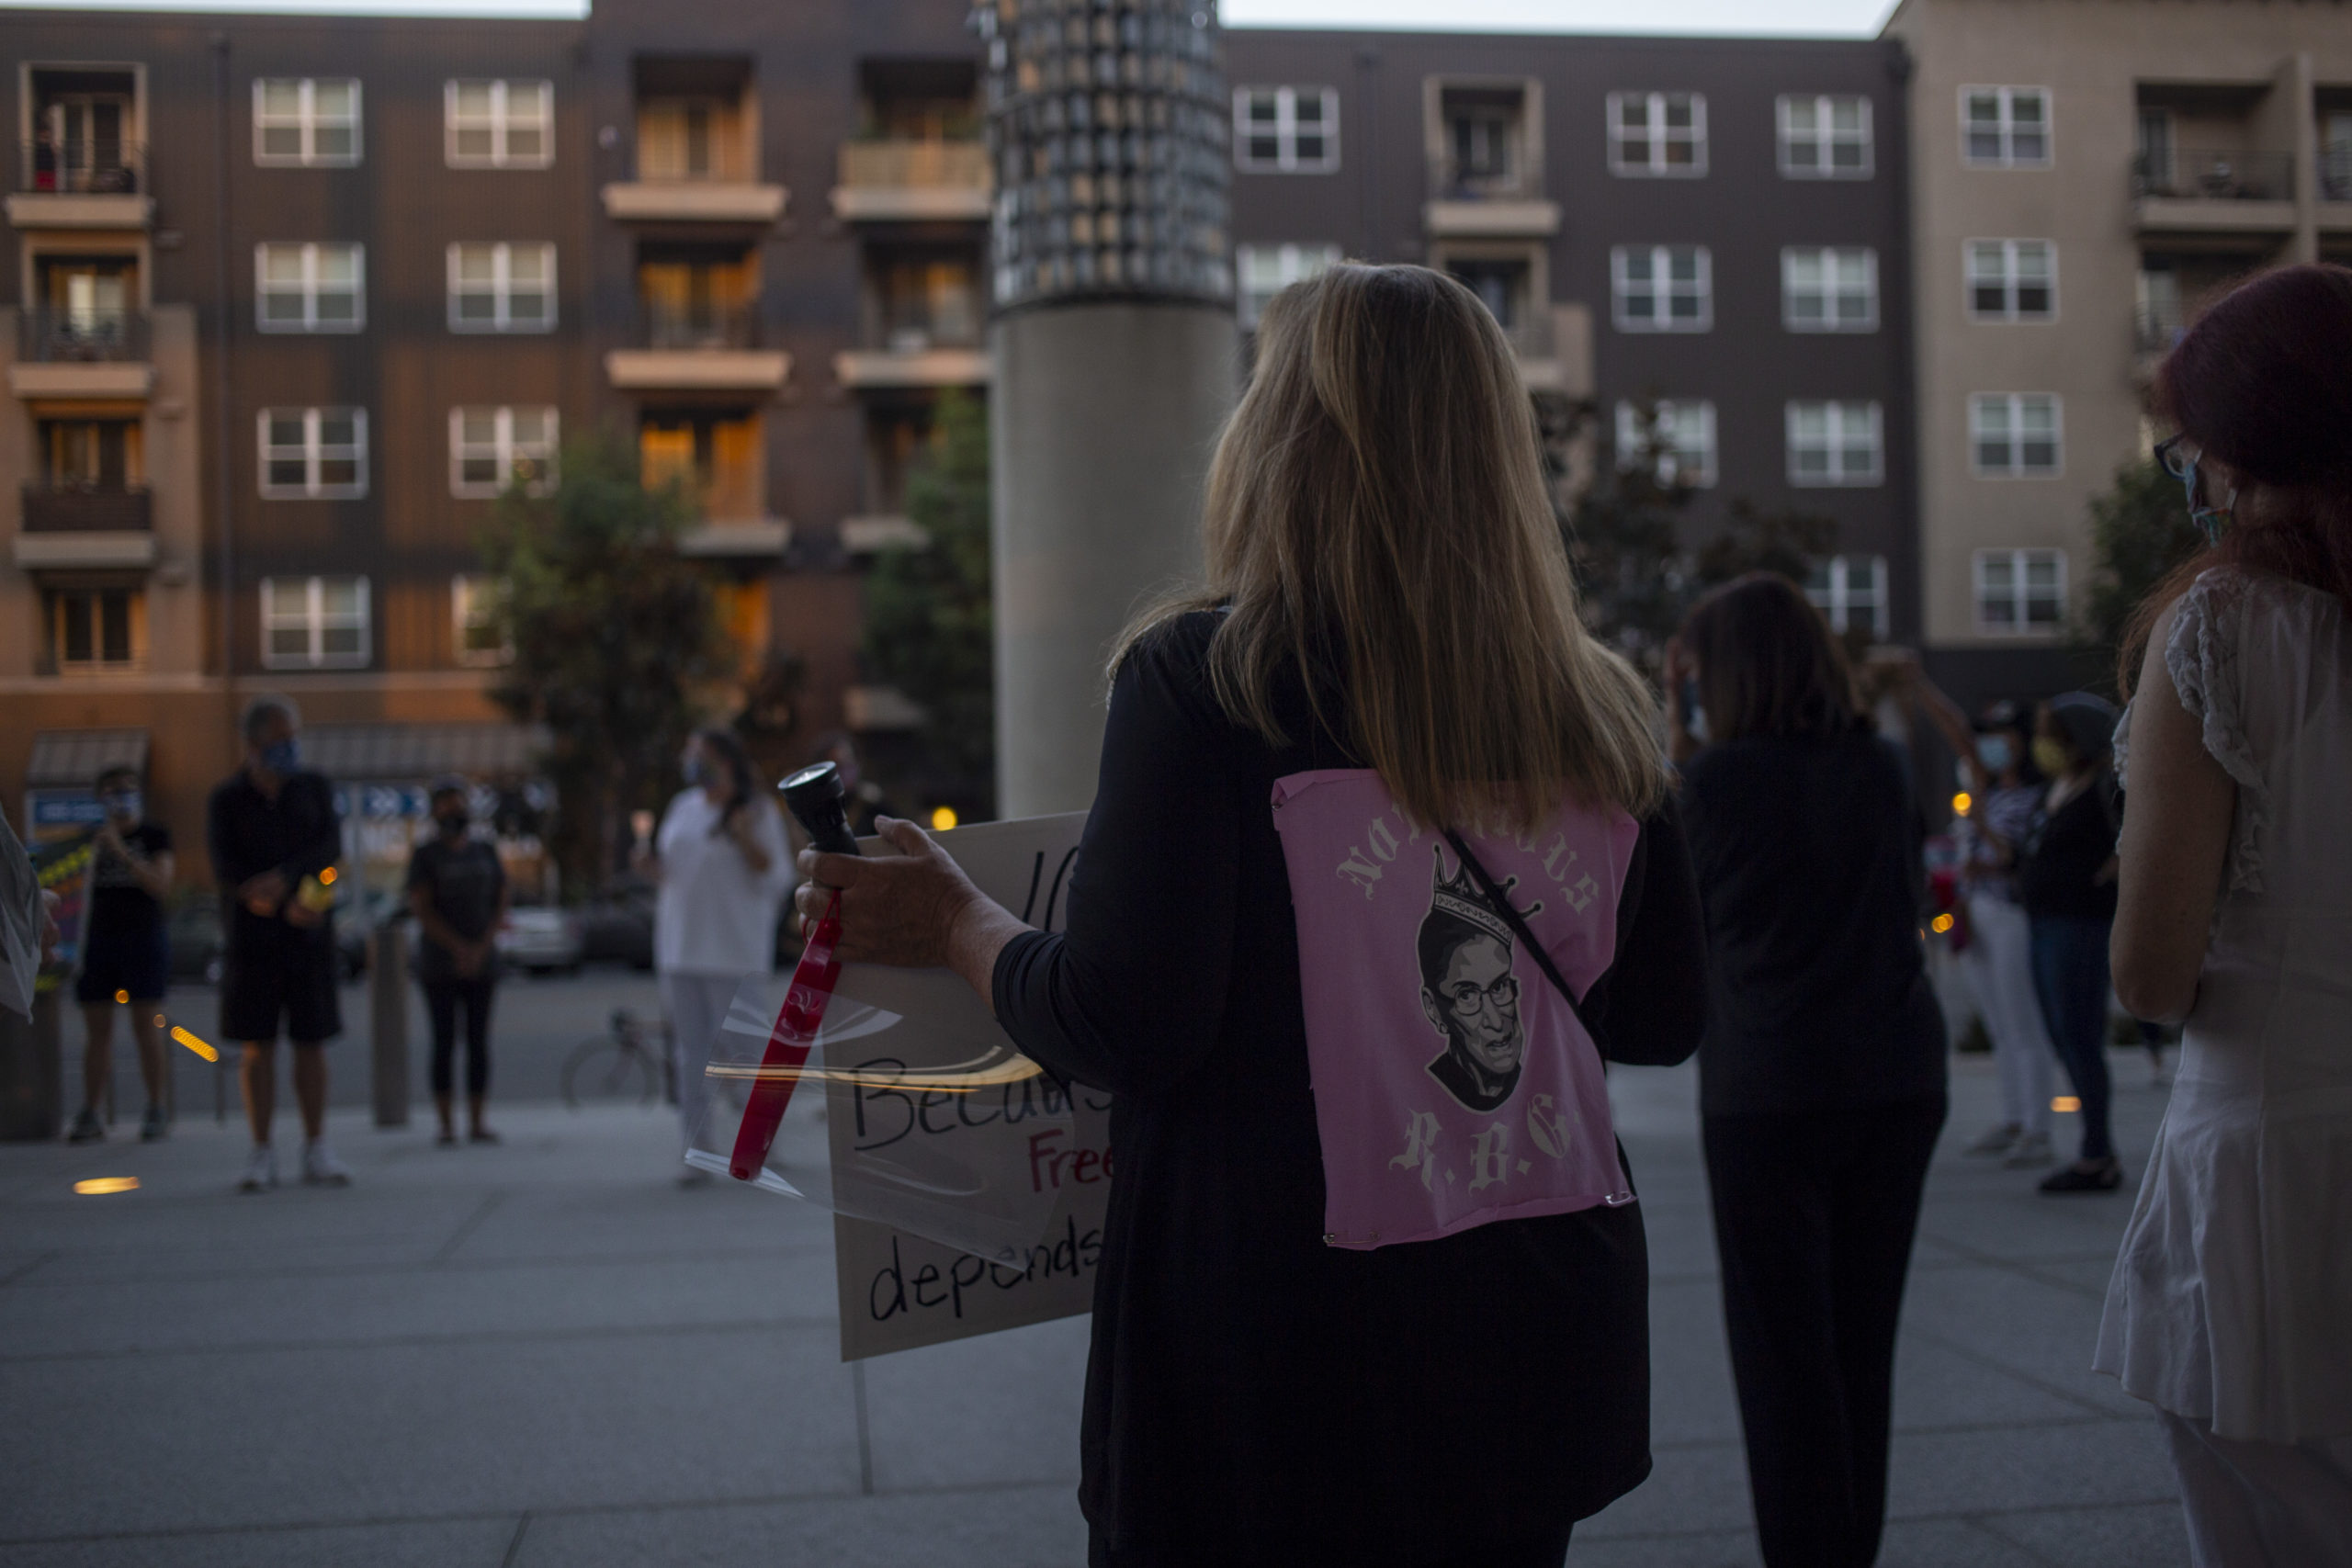 A woman stands with a photo of Ruth Bader Ginsburg on her back